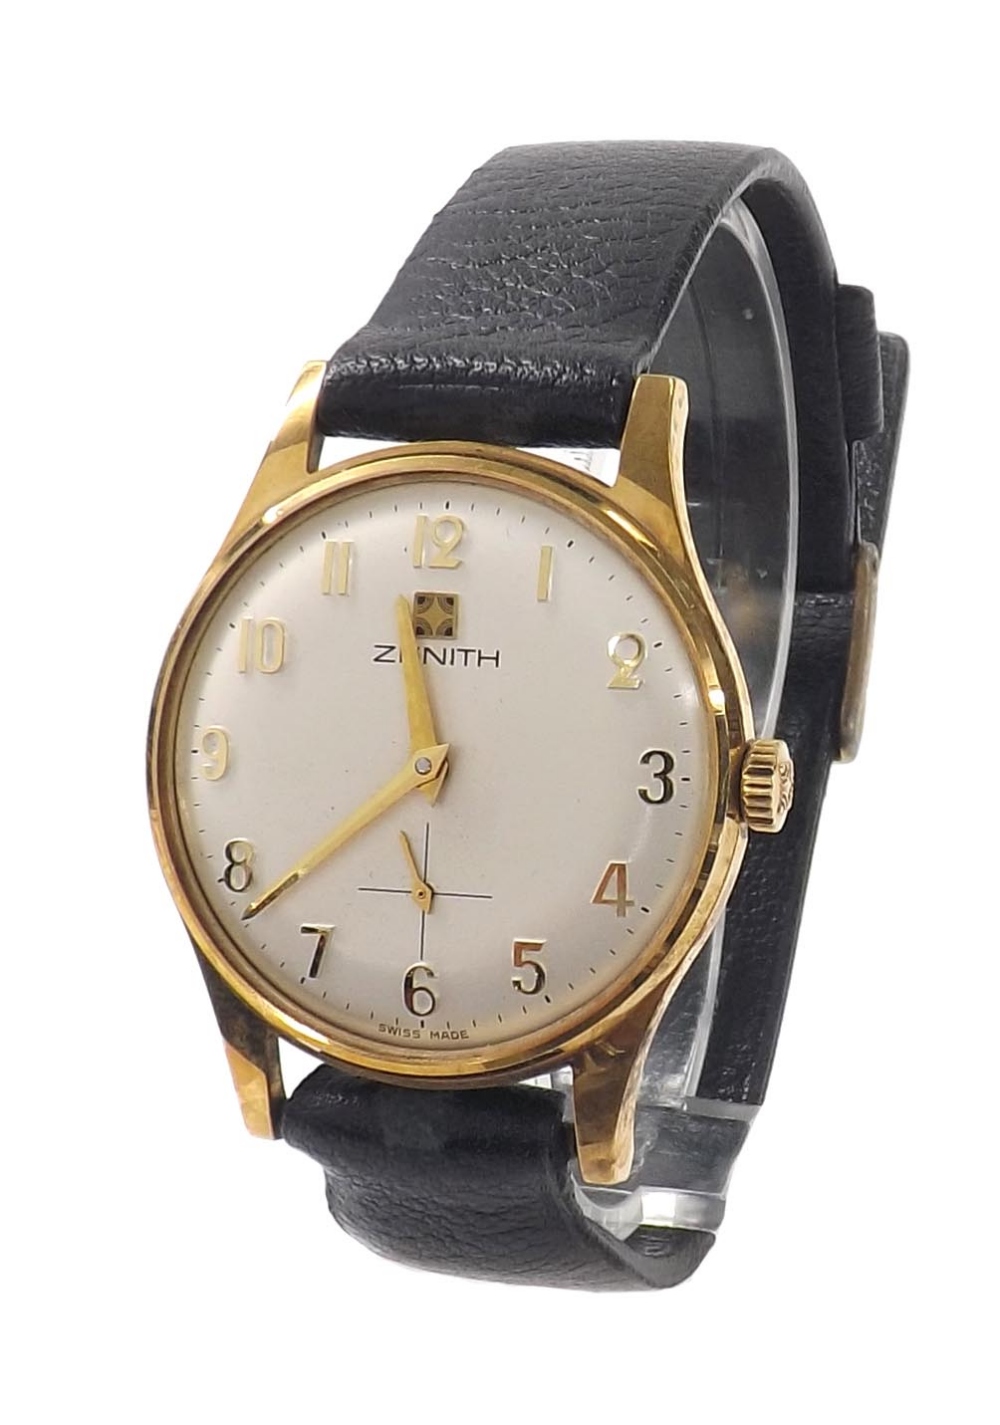 Zenith 9ct gentleman's wristwatch, London 1973, silvered dial with gilt Arabic numerals, outer